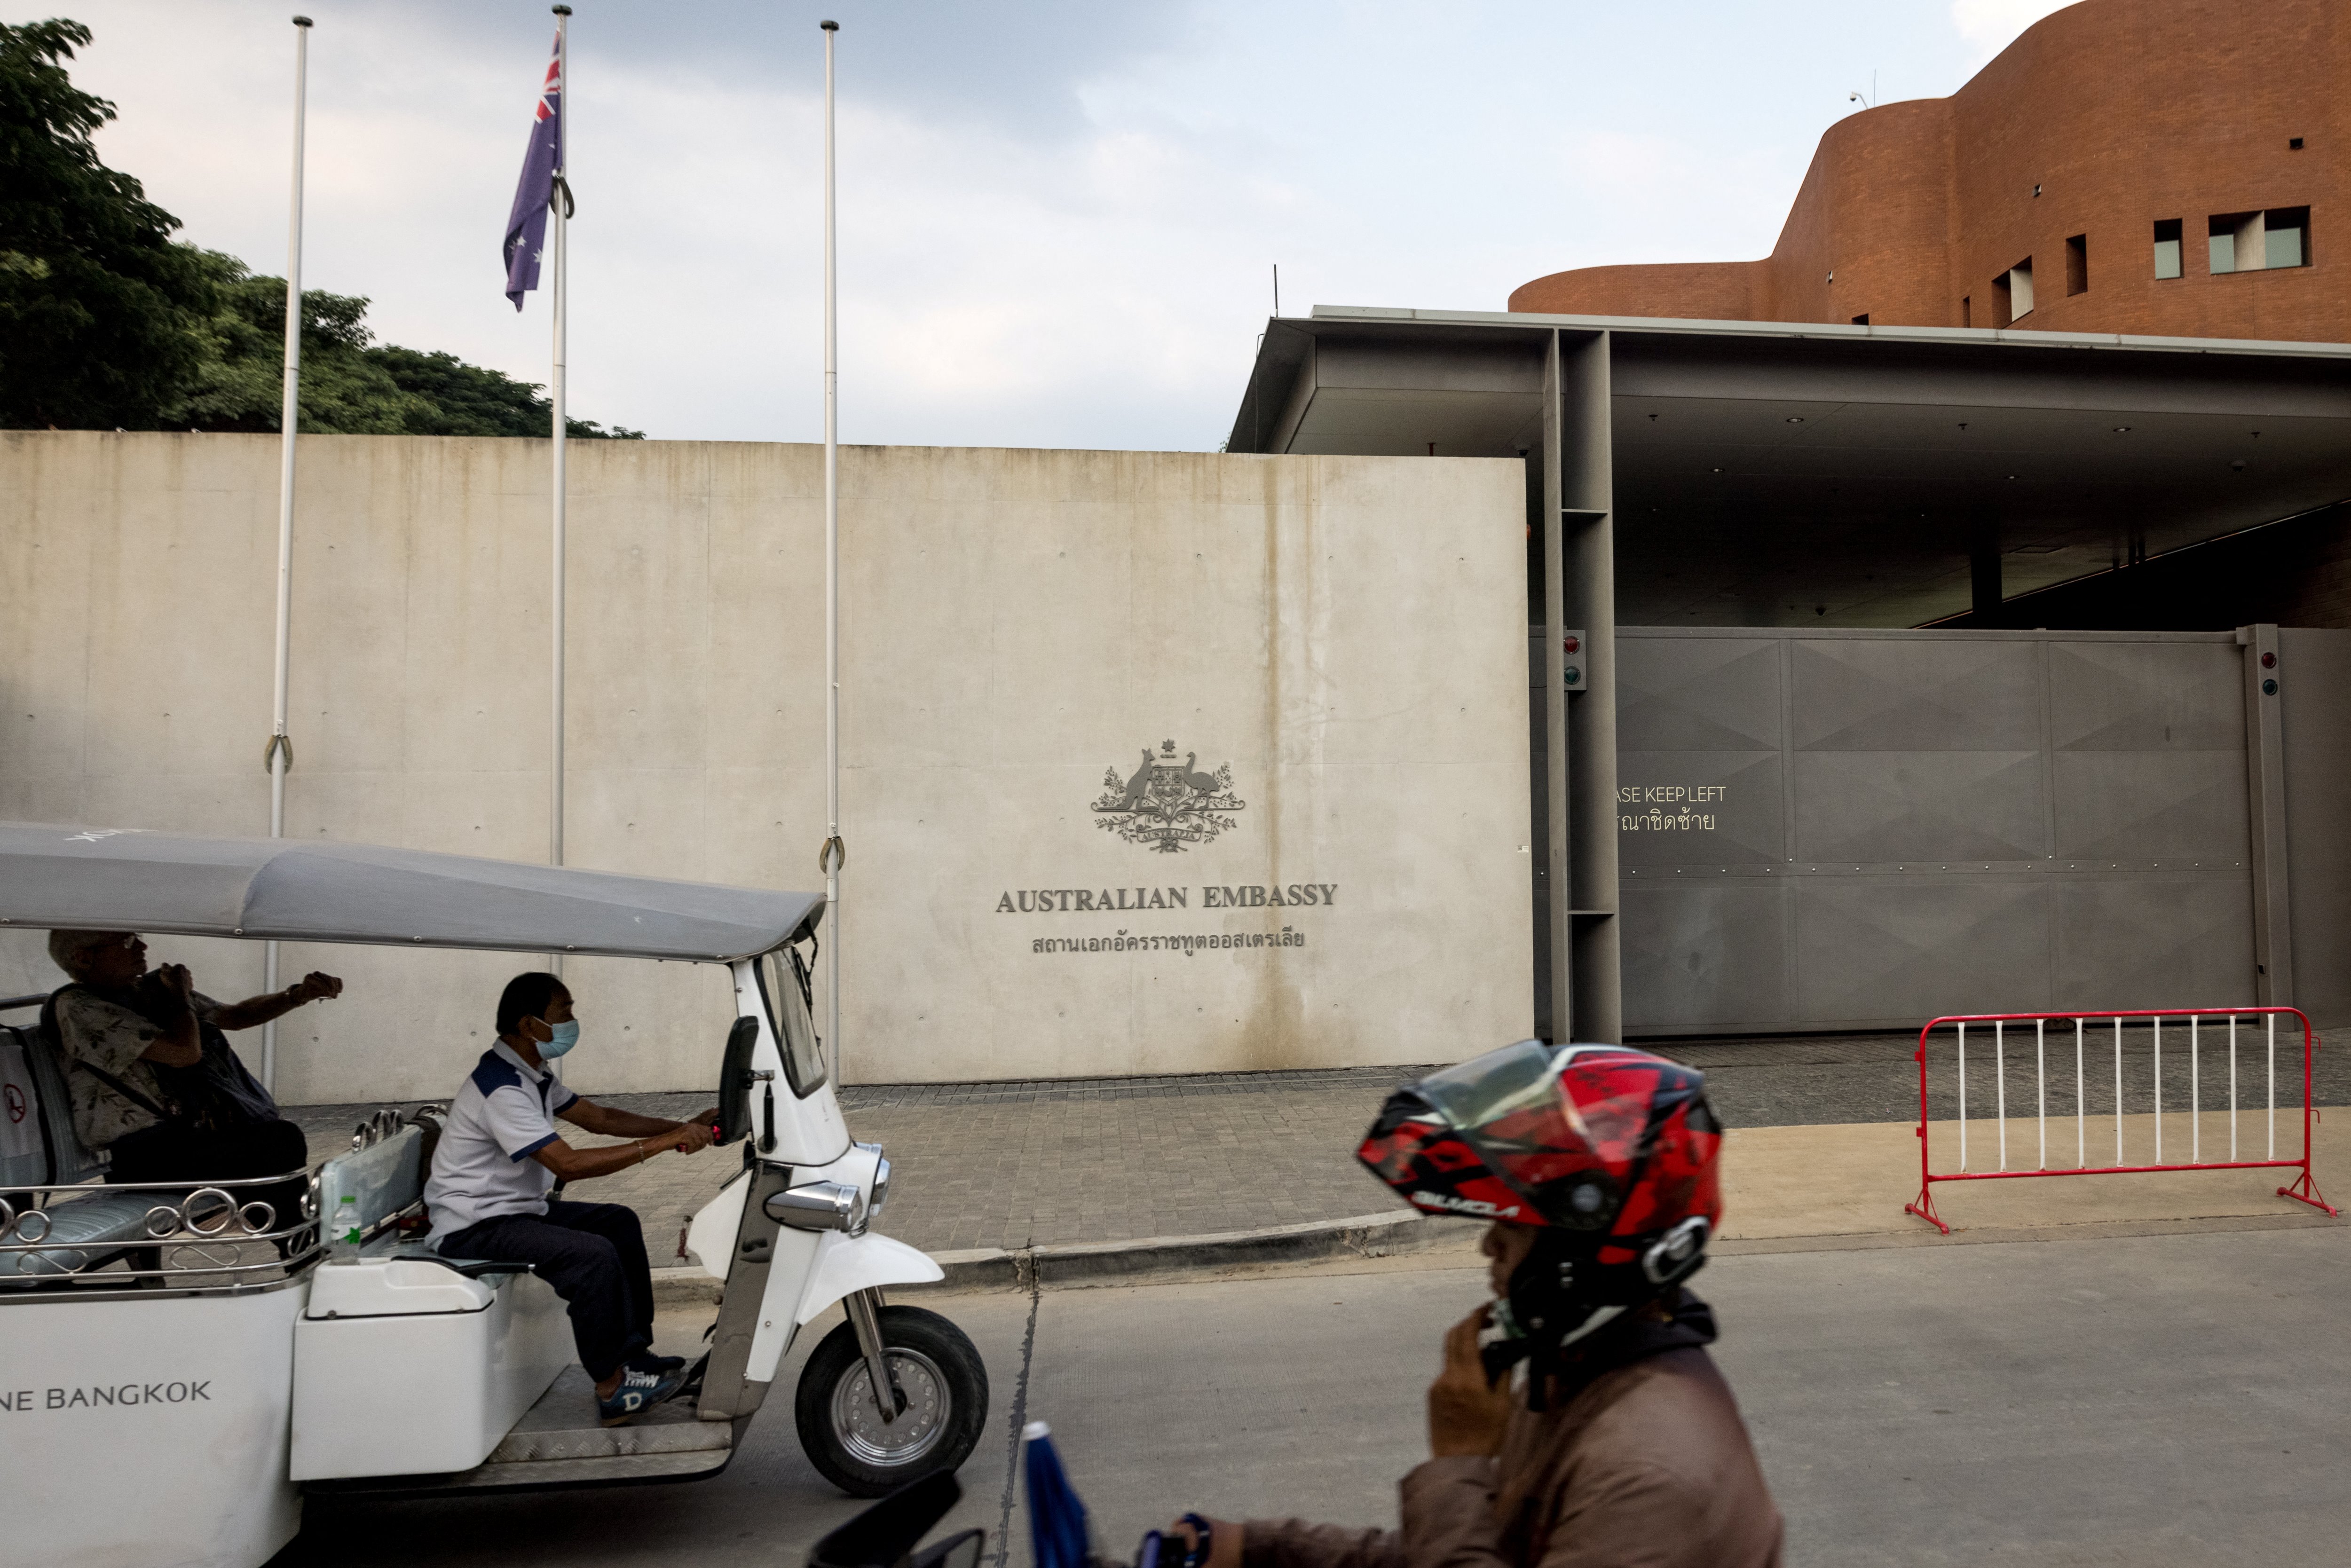 The Australian embassy building sits near other foreign diplomatic missions like the Japanese embassy. Photo: Jack TAYLOR / AFP